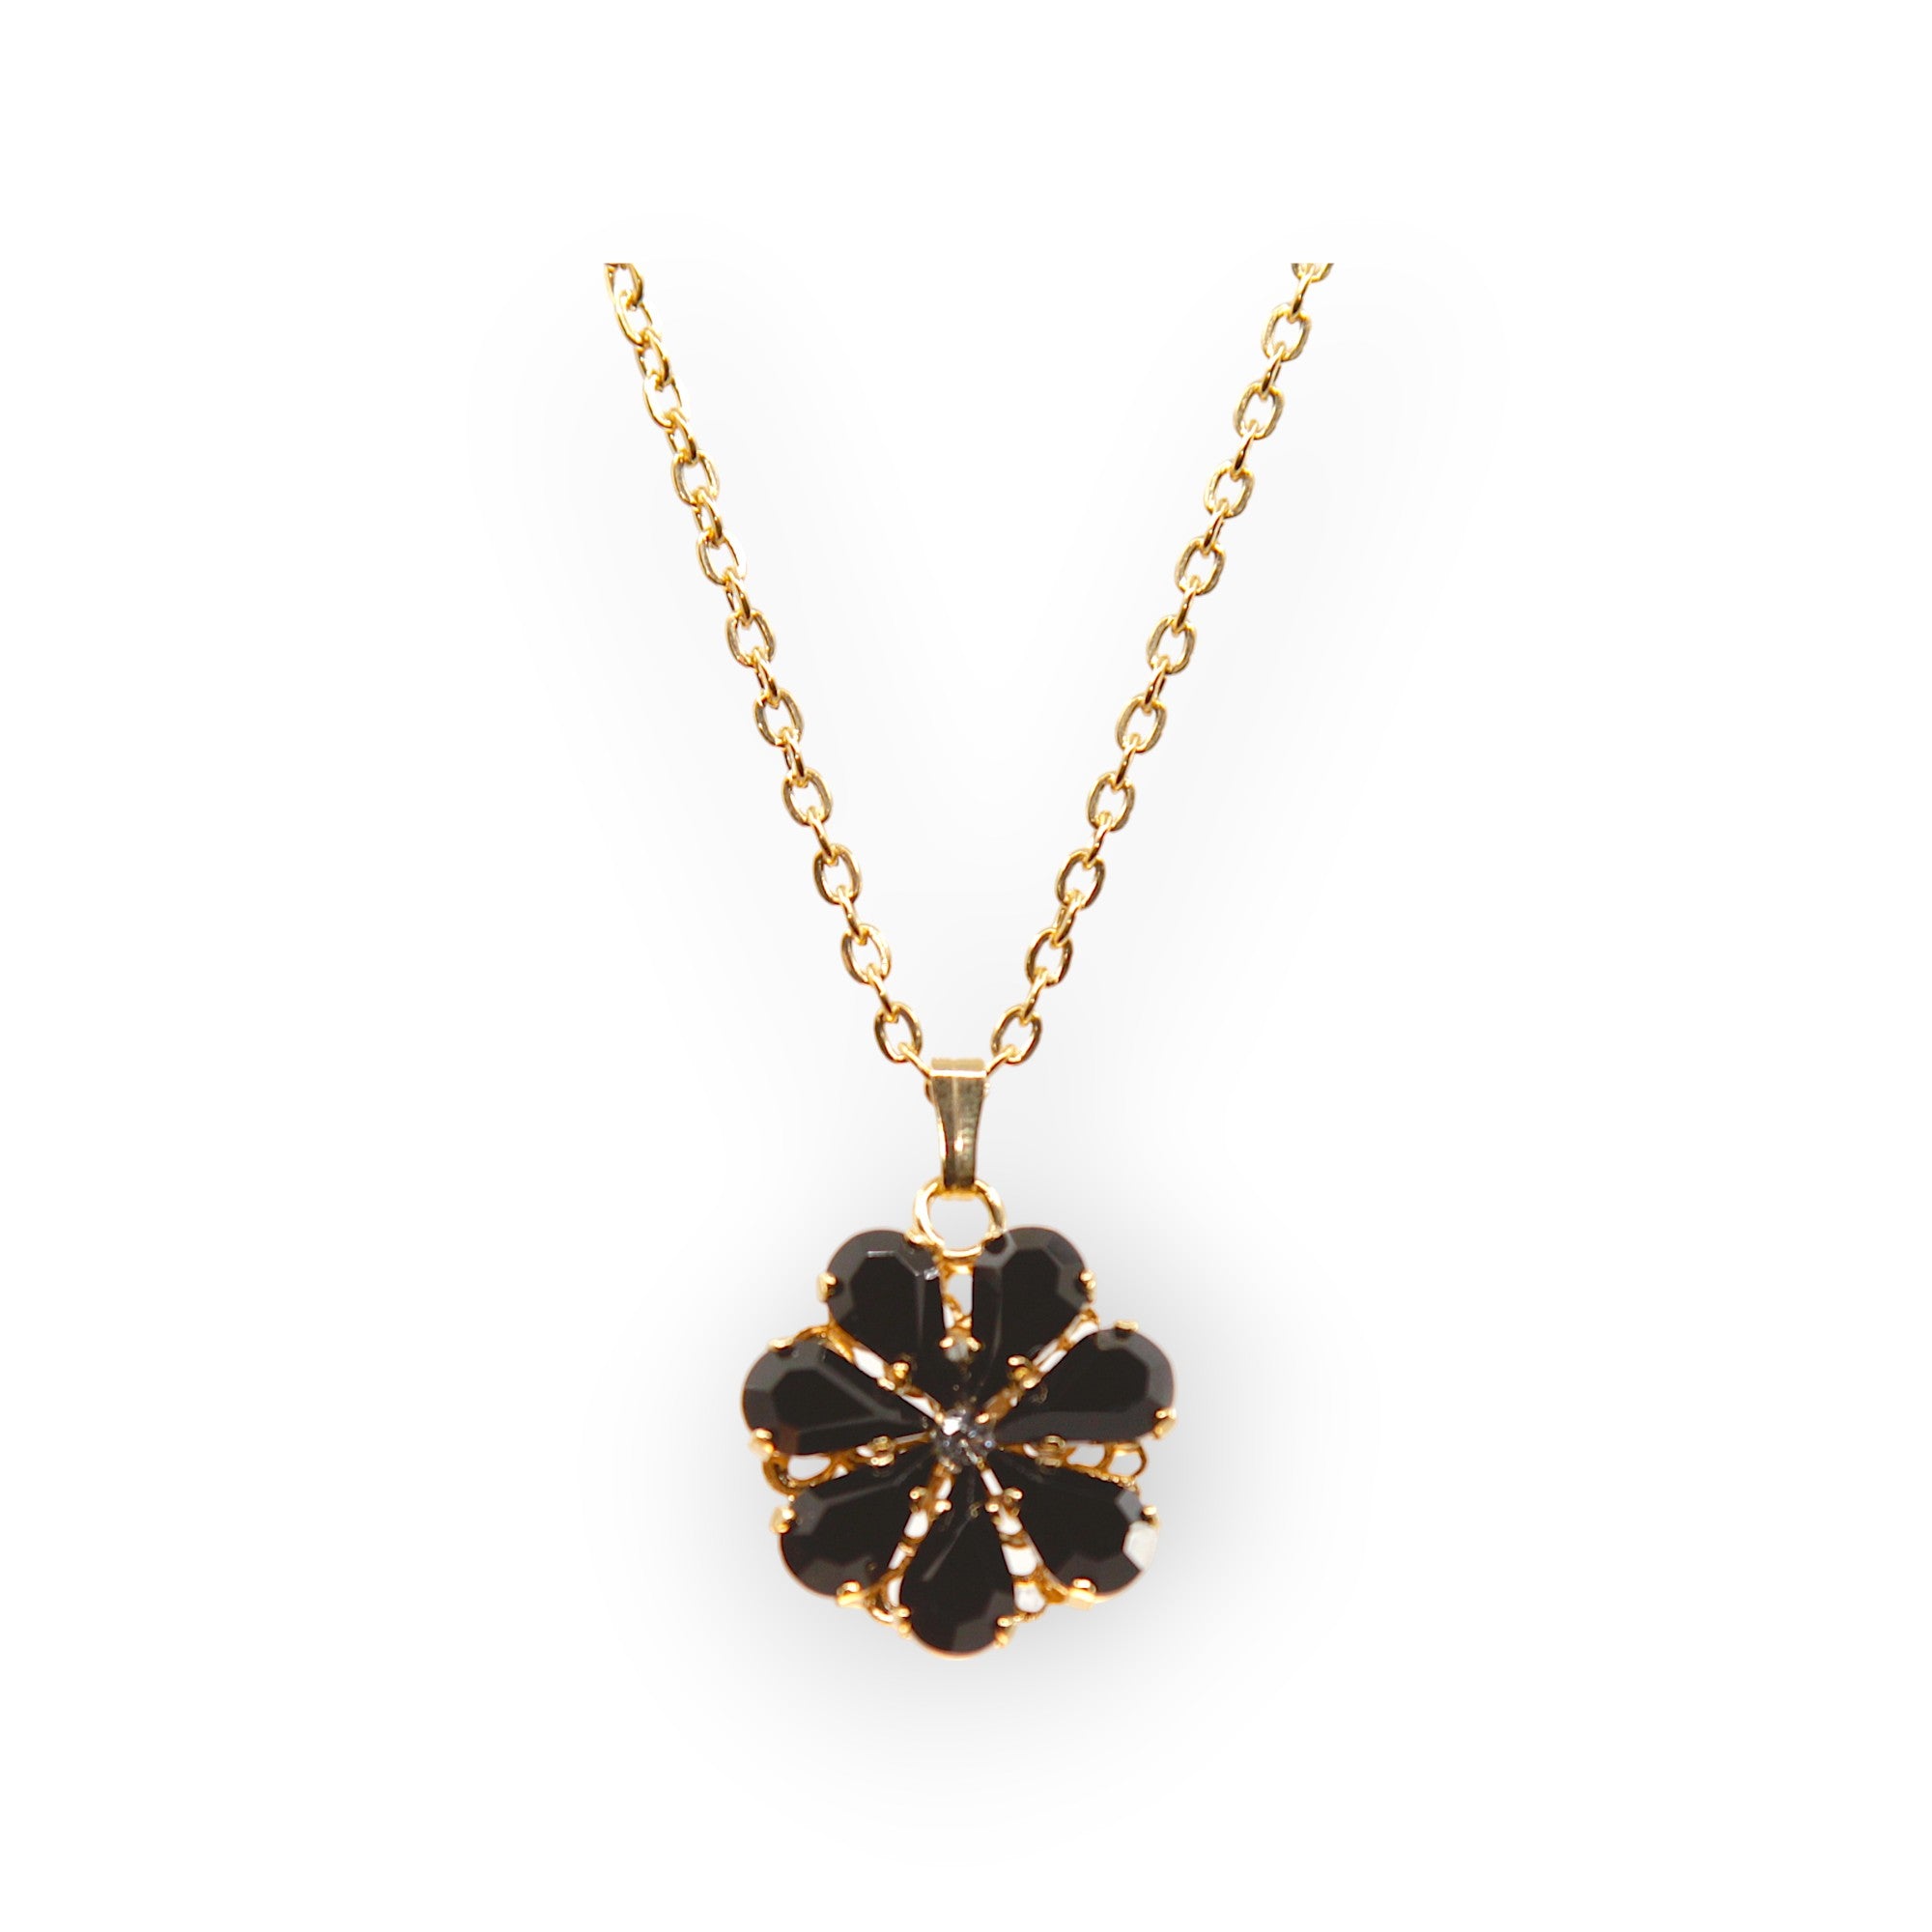 Daisy Pendant Necklace With Crystal Drops In Onyx Shades.